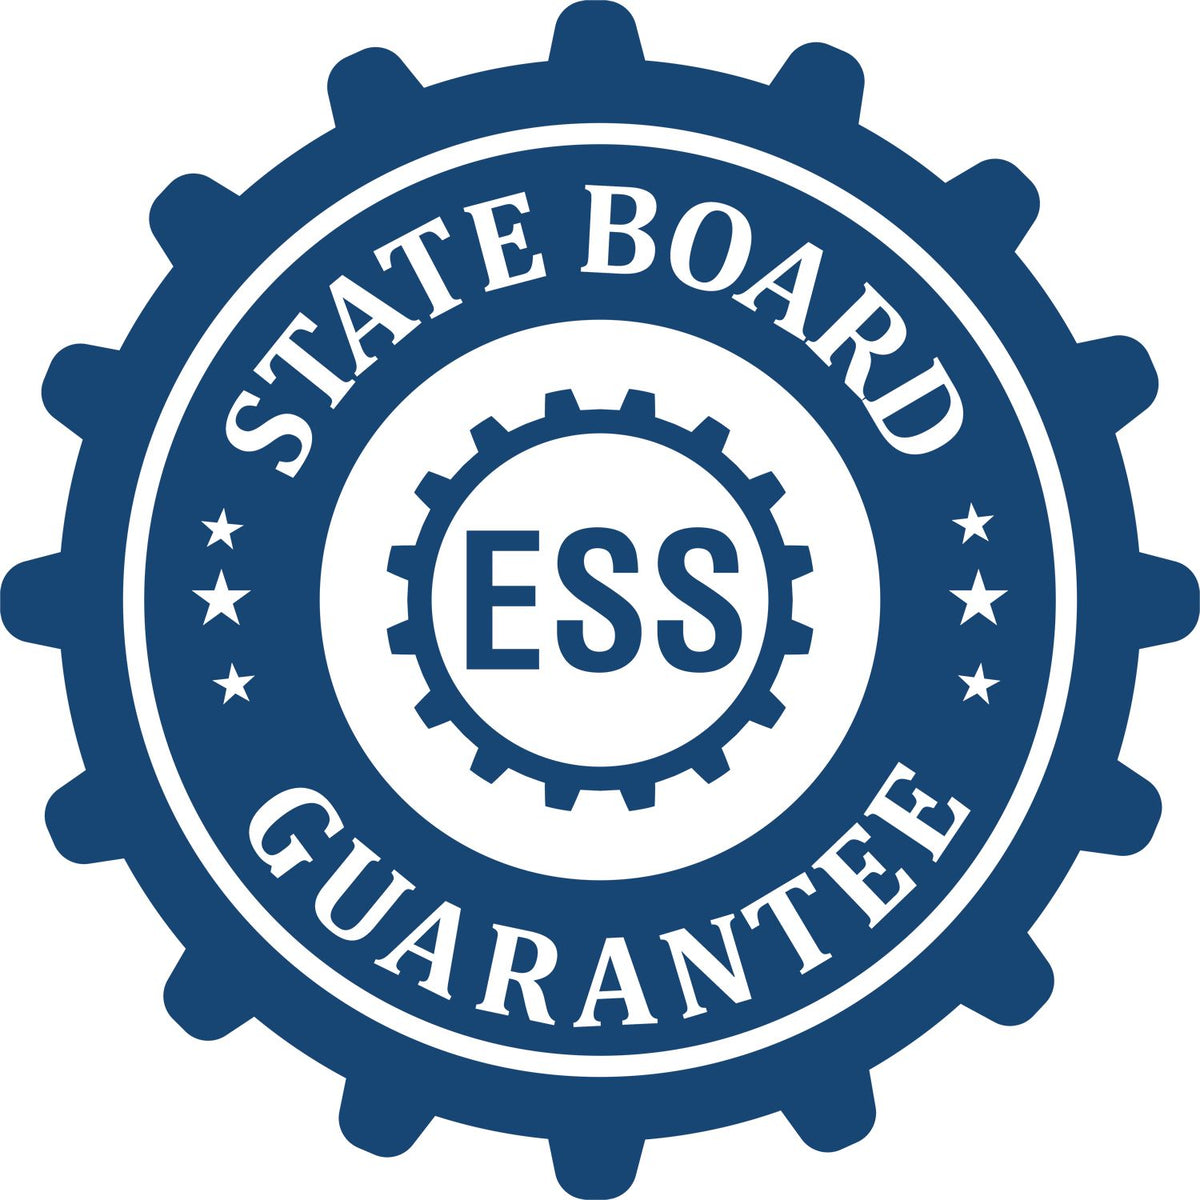 An emblem in a gear shape illustrating a state board guarantee for the Digital Delaware Geologist Stamp, Electronic Seal for Delaware Geologist